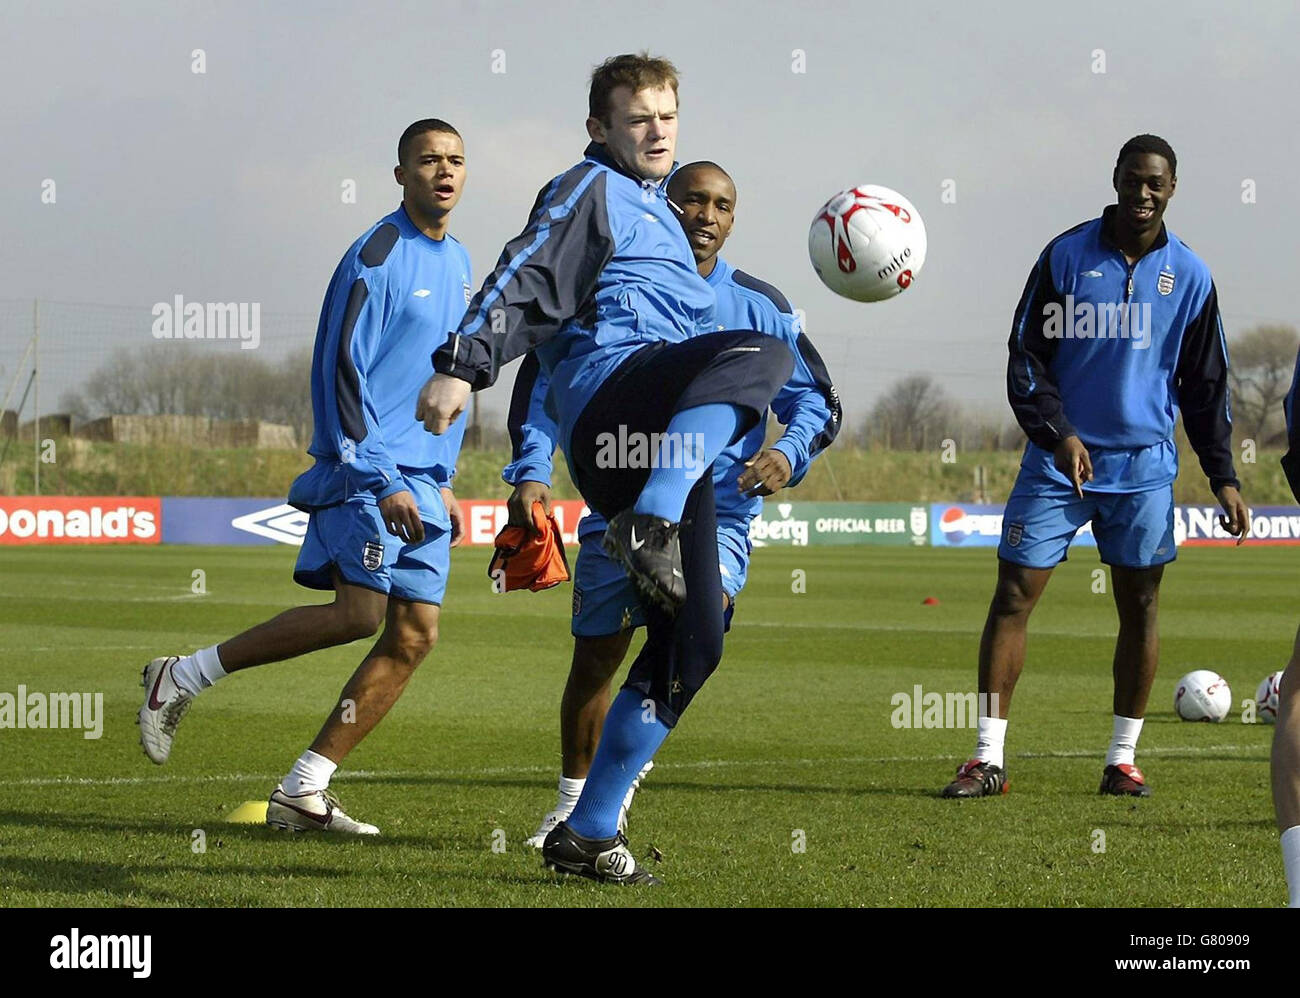 Soccer - FIFA World Cup 2006 Qualifier - Group Six - England v Northern Ireland - England Training - Carrington. England's Wayne Rooney (C) in action during a training session. Stock Photo